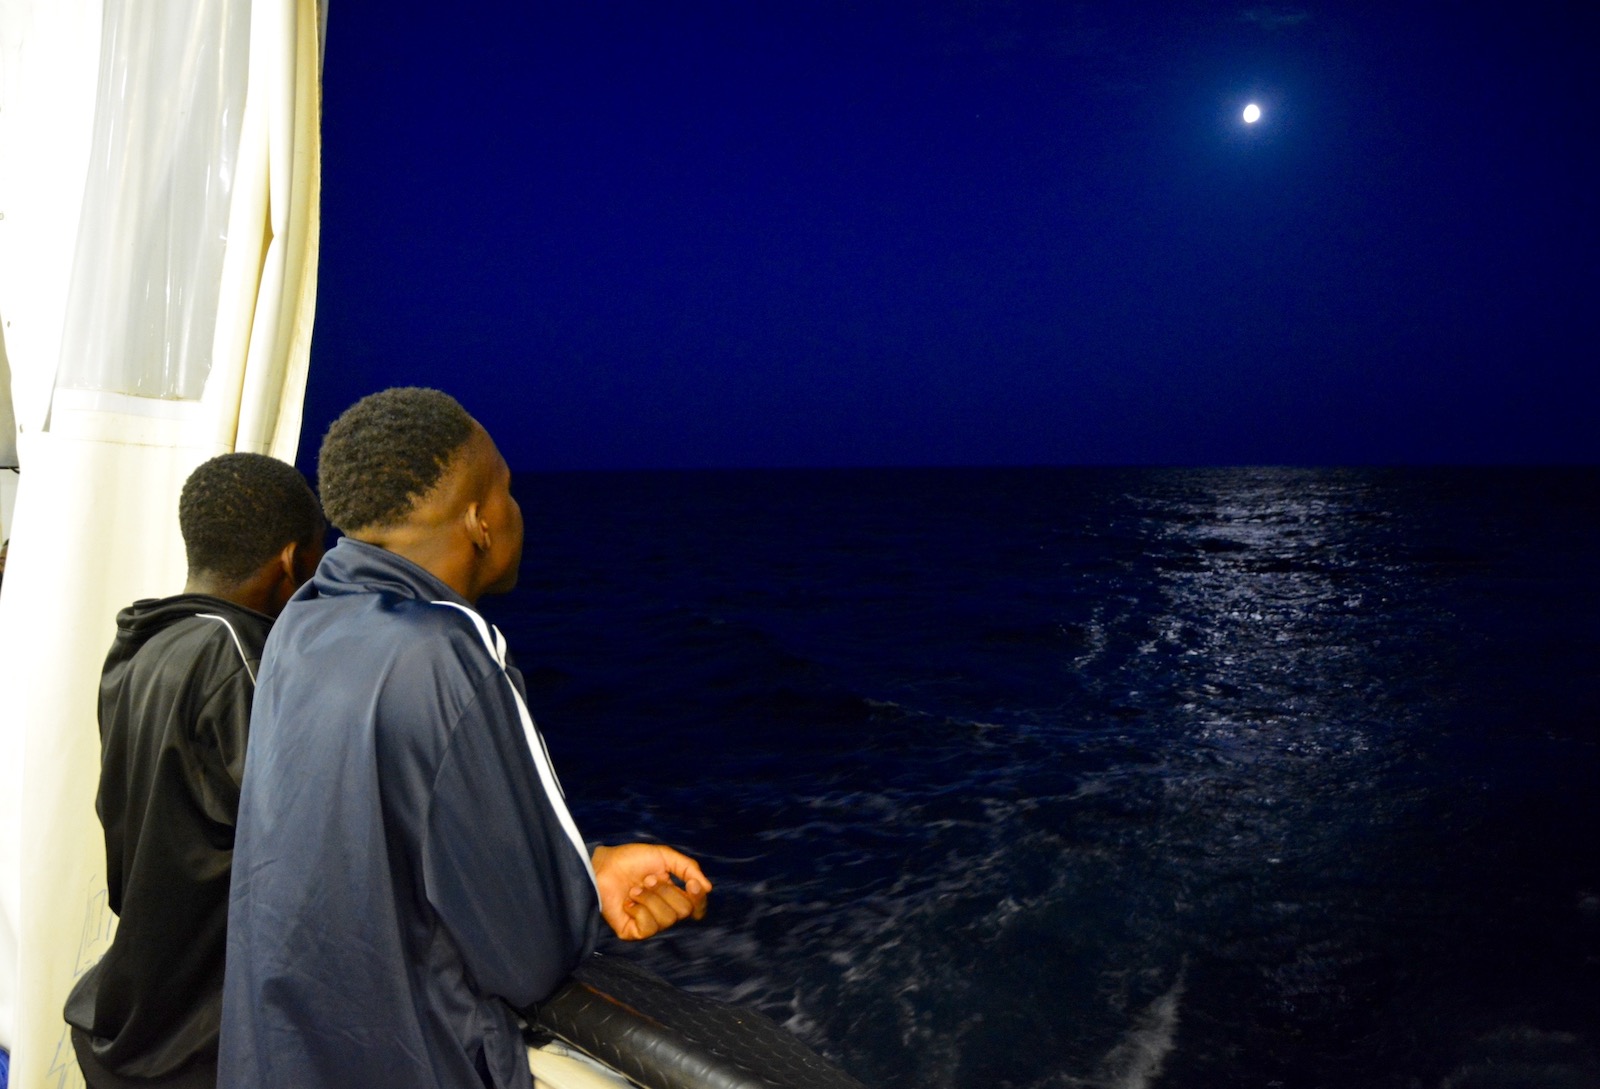 Two men look at the moon from the deck of a ship at night